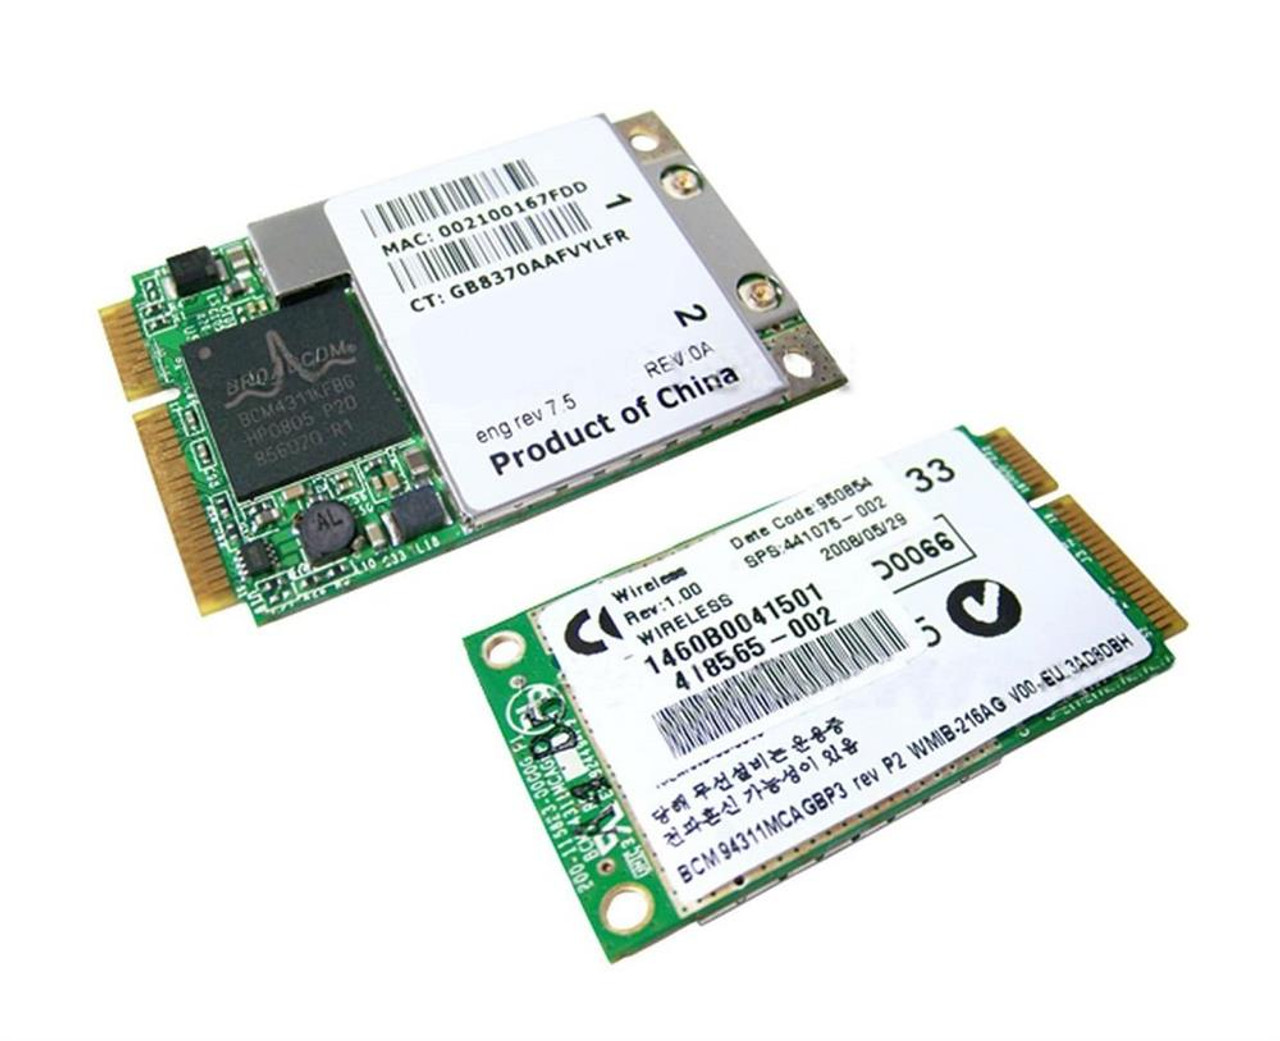 BCM94311MCAGB Broadcom 2.4GHz 54Mbps IEEE 802.11a/b/g Mini PCI WLAN Wireless Network Card for HP Compatible